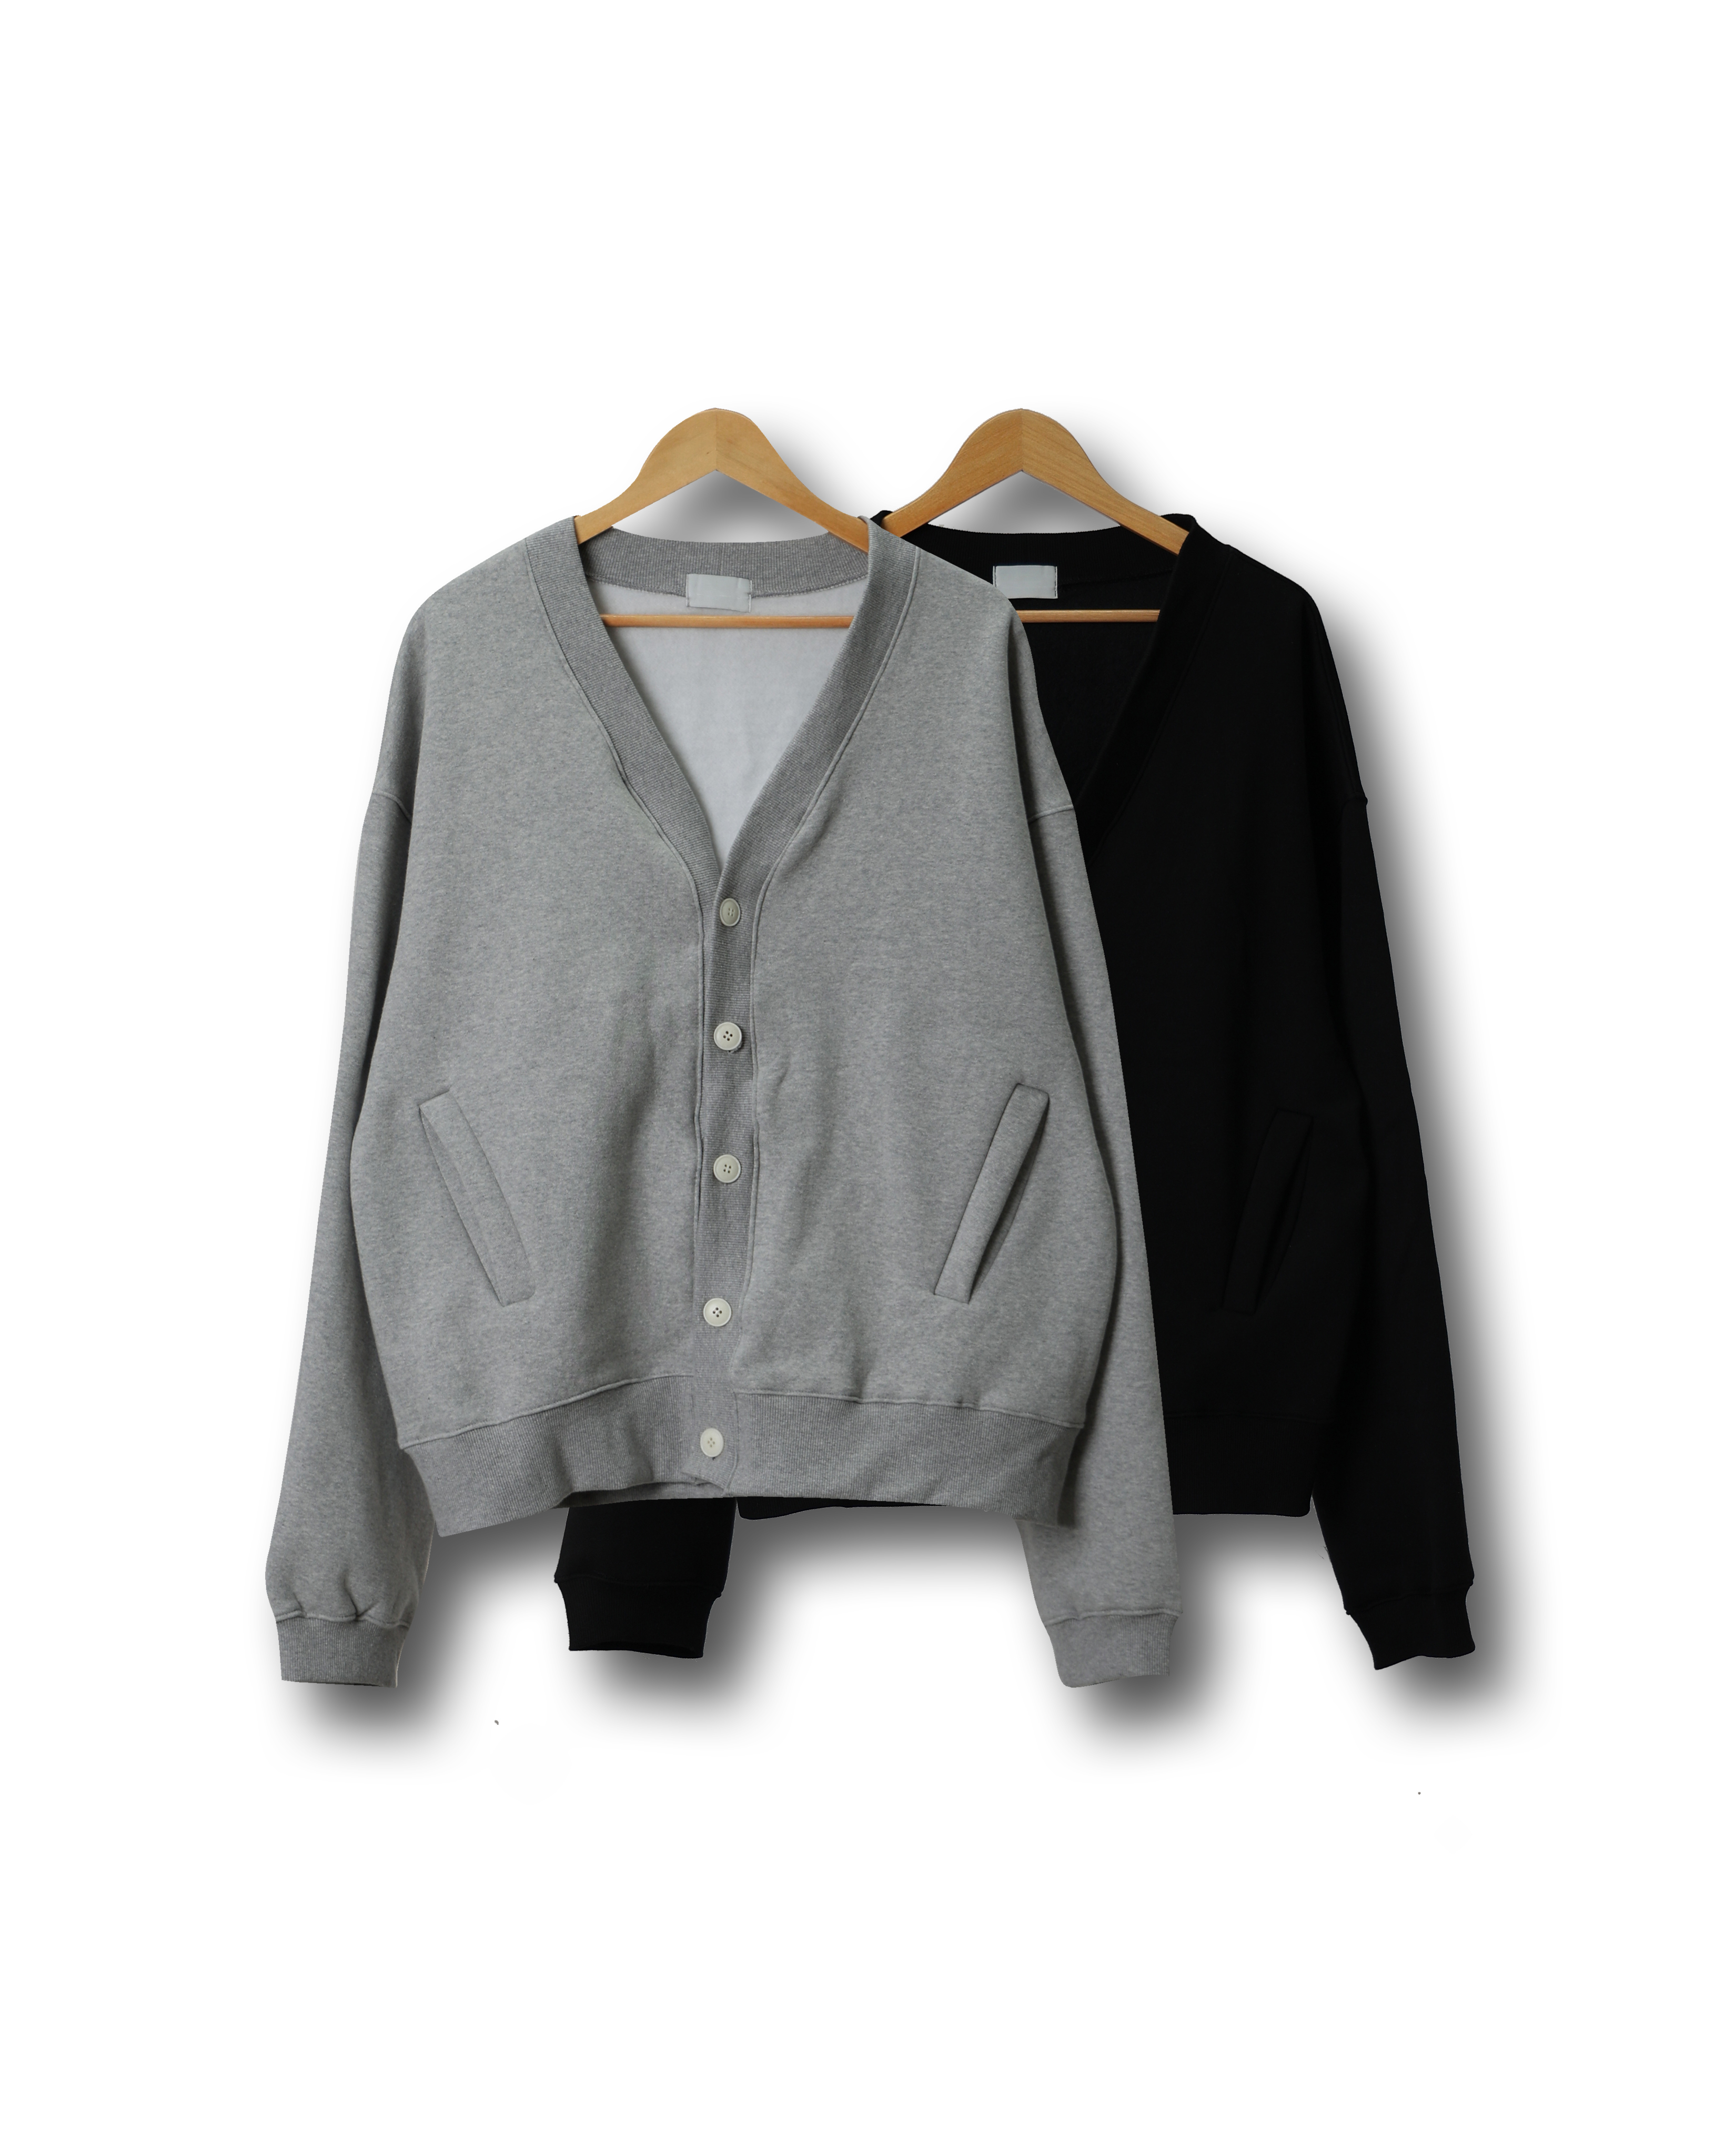 L’FRK Napping Over Sweat Cardigan (Black/Gray)